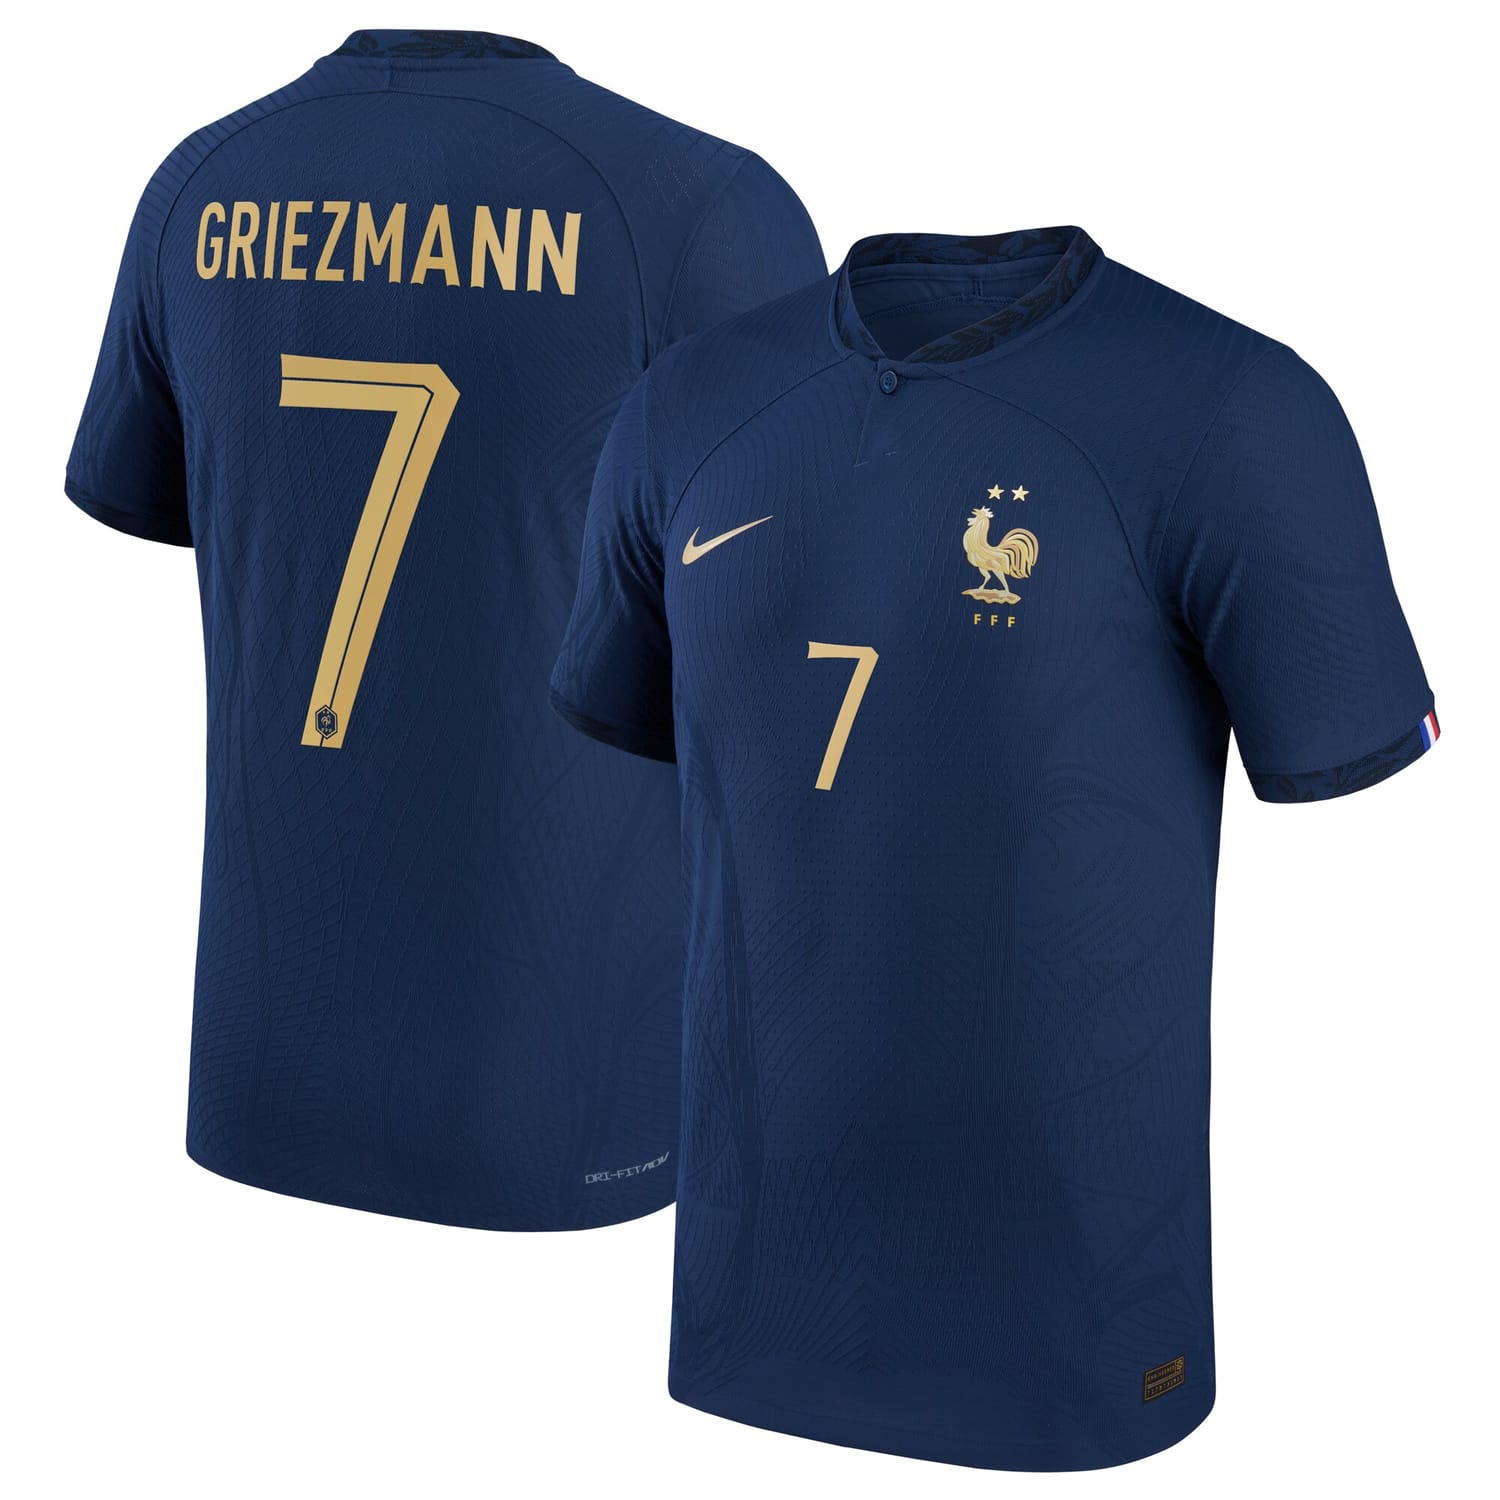 France National Team Home Authentic Jersey Shirt 2022 player Antoine Griezmann 7 printing for Men